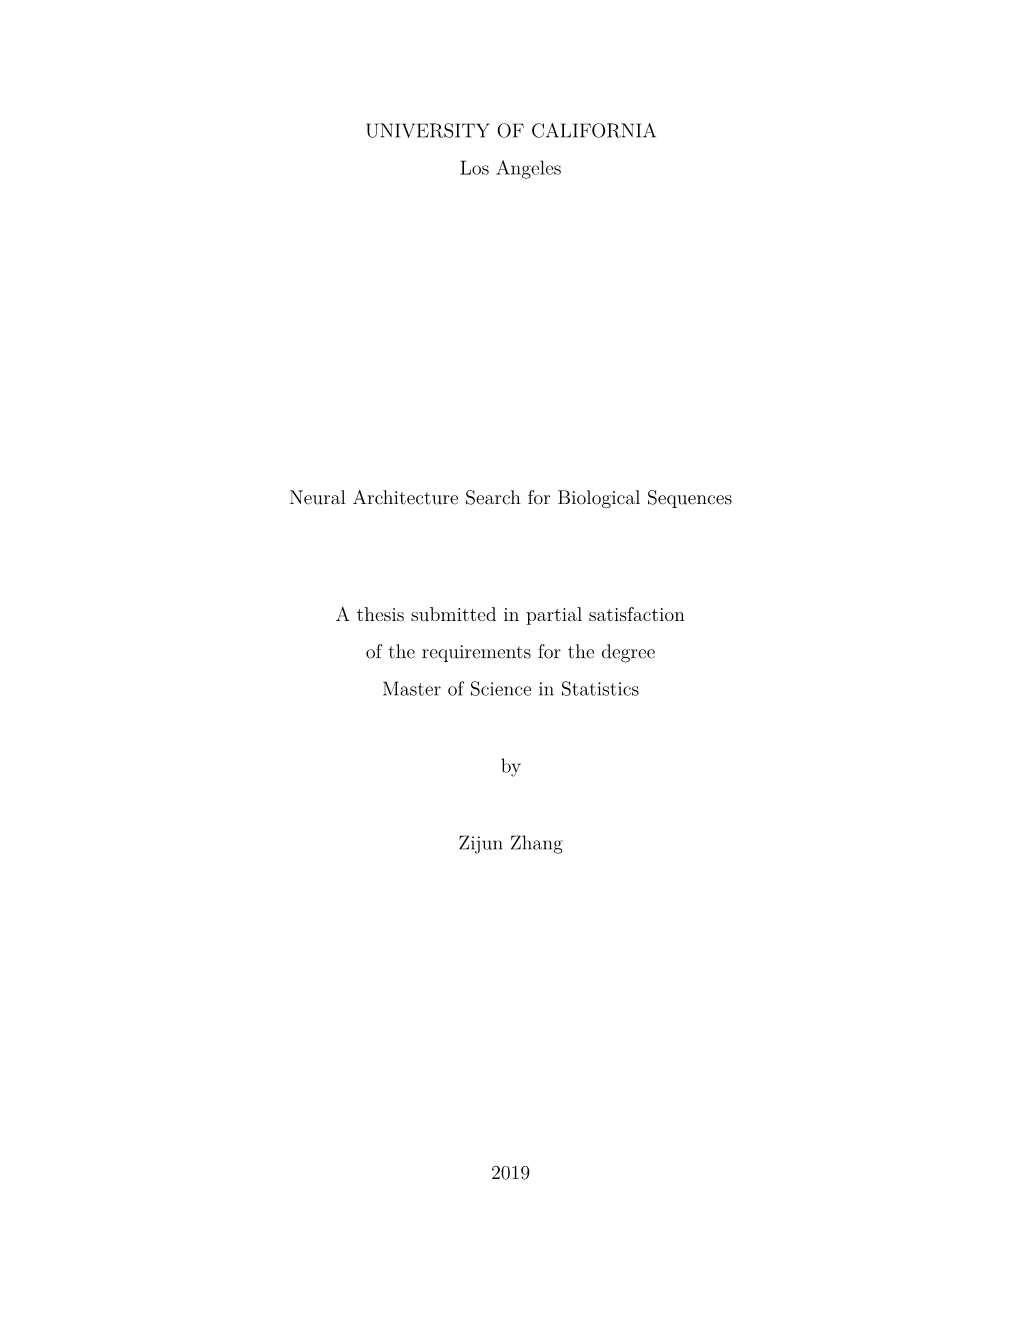 UNIVERSITY of CALIFORNIA Los Angeles Neural Architecture Search for Biological Sequences a Thesis Submitted in Partial Satisfact